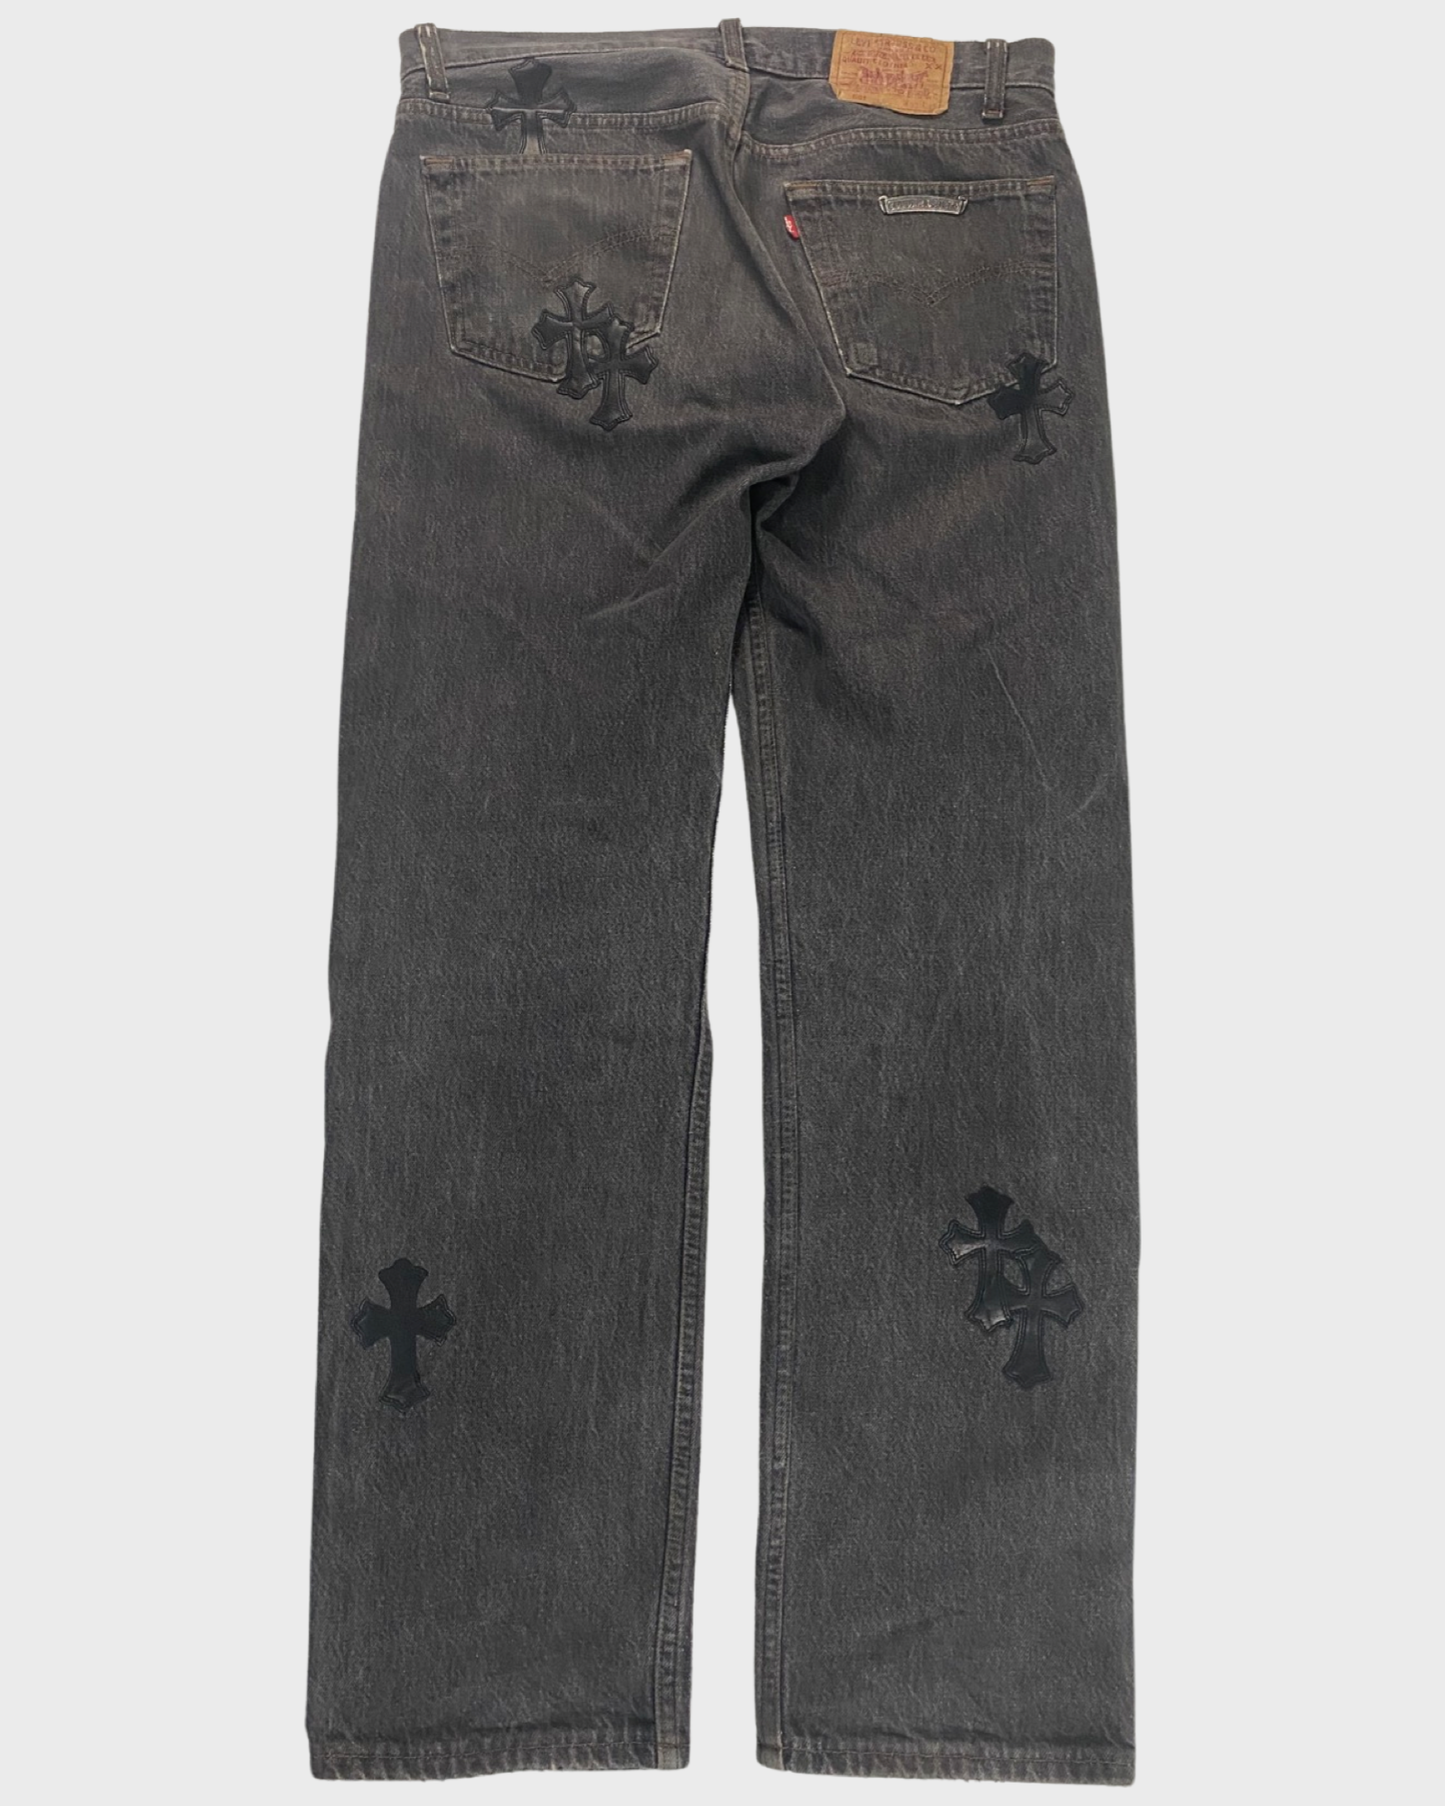 Chrome Hearts Levi’s 501 cross patched jeans in washed out black / grey SZ:W32